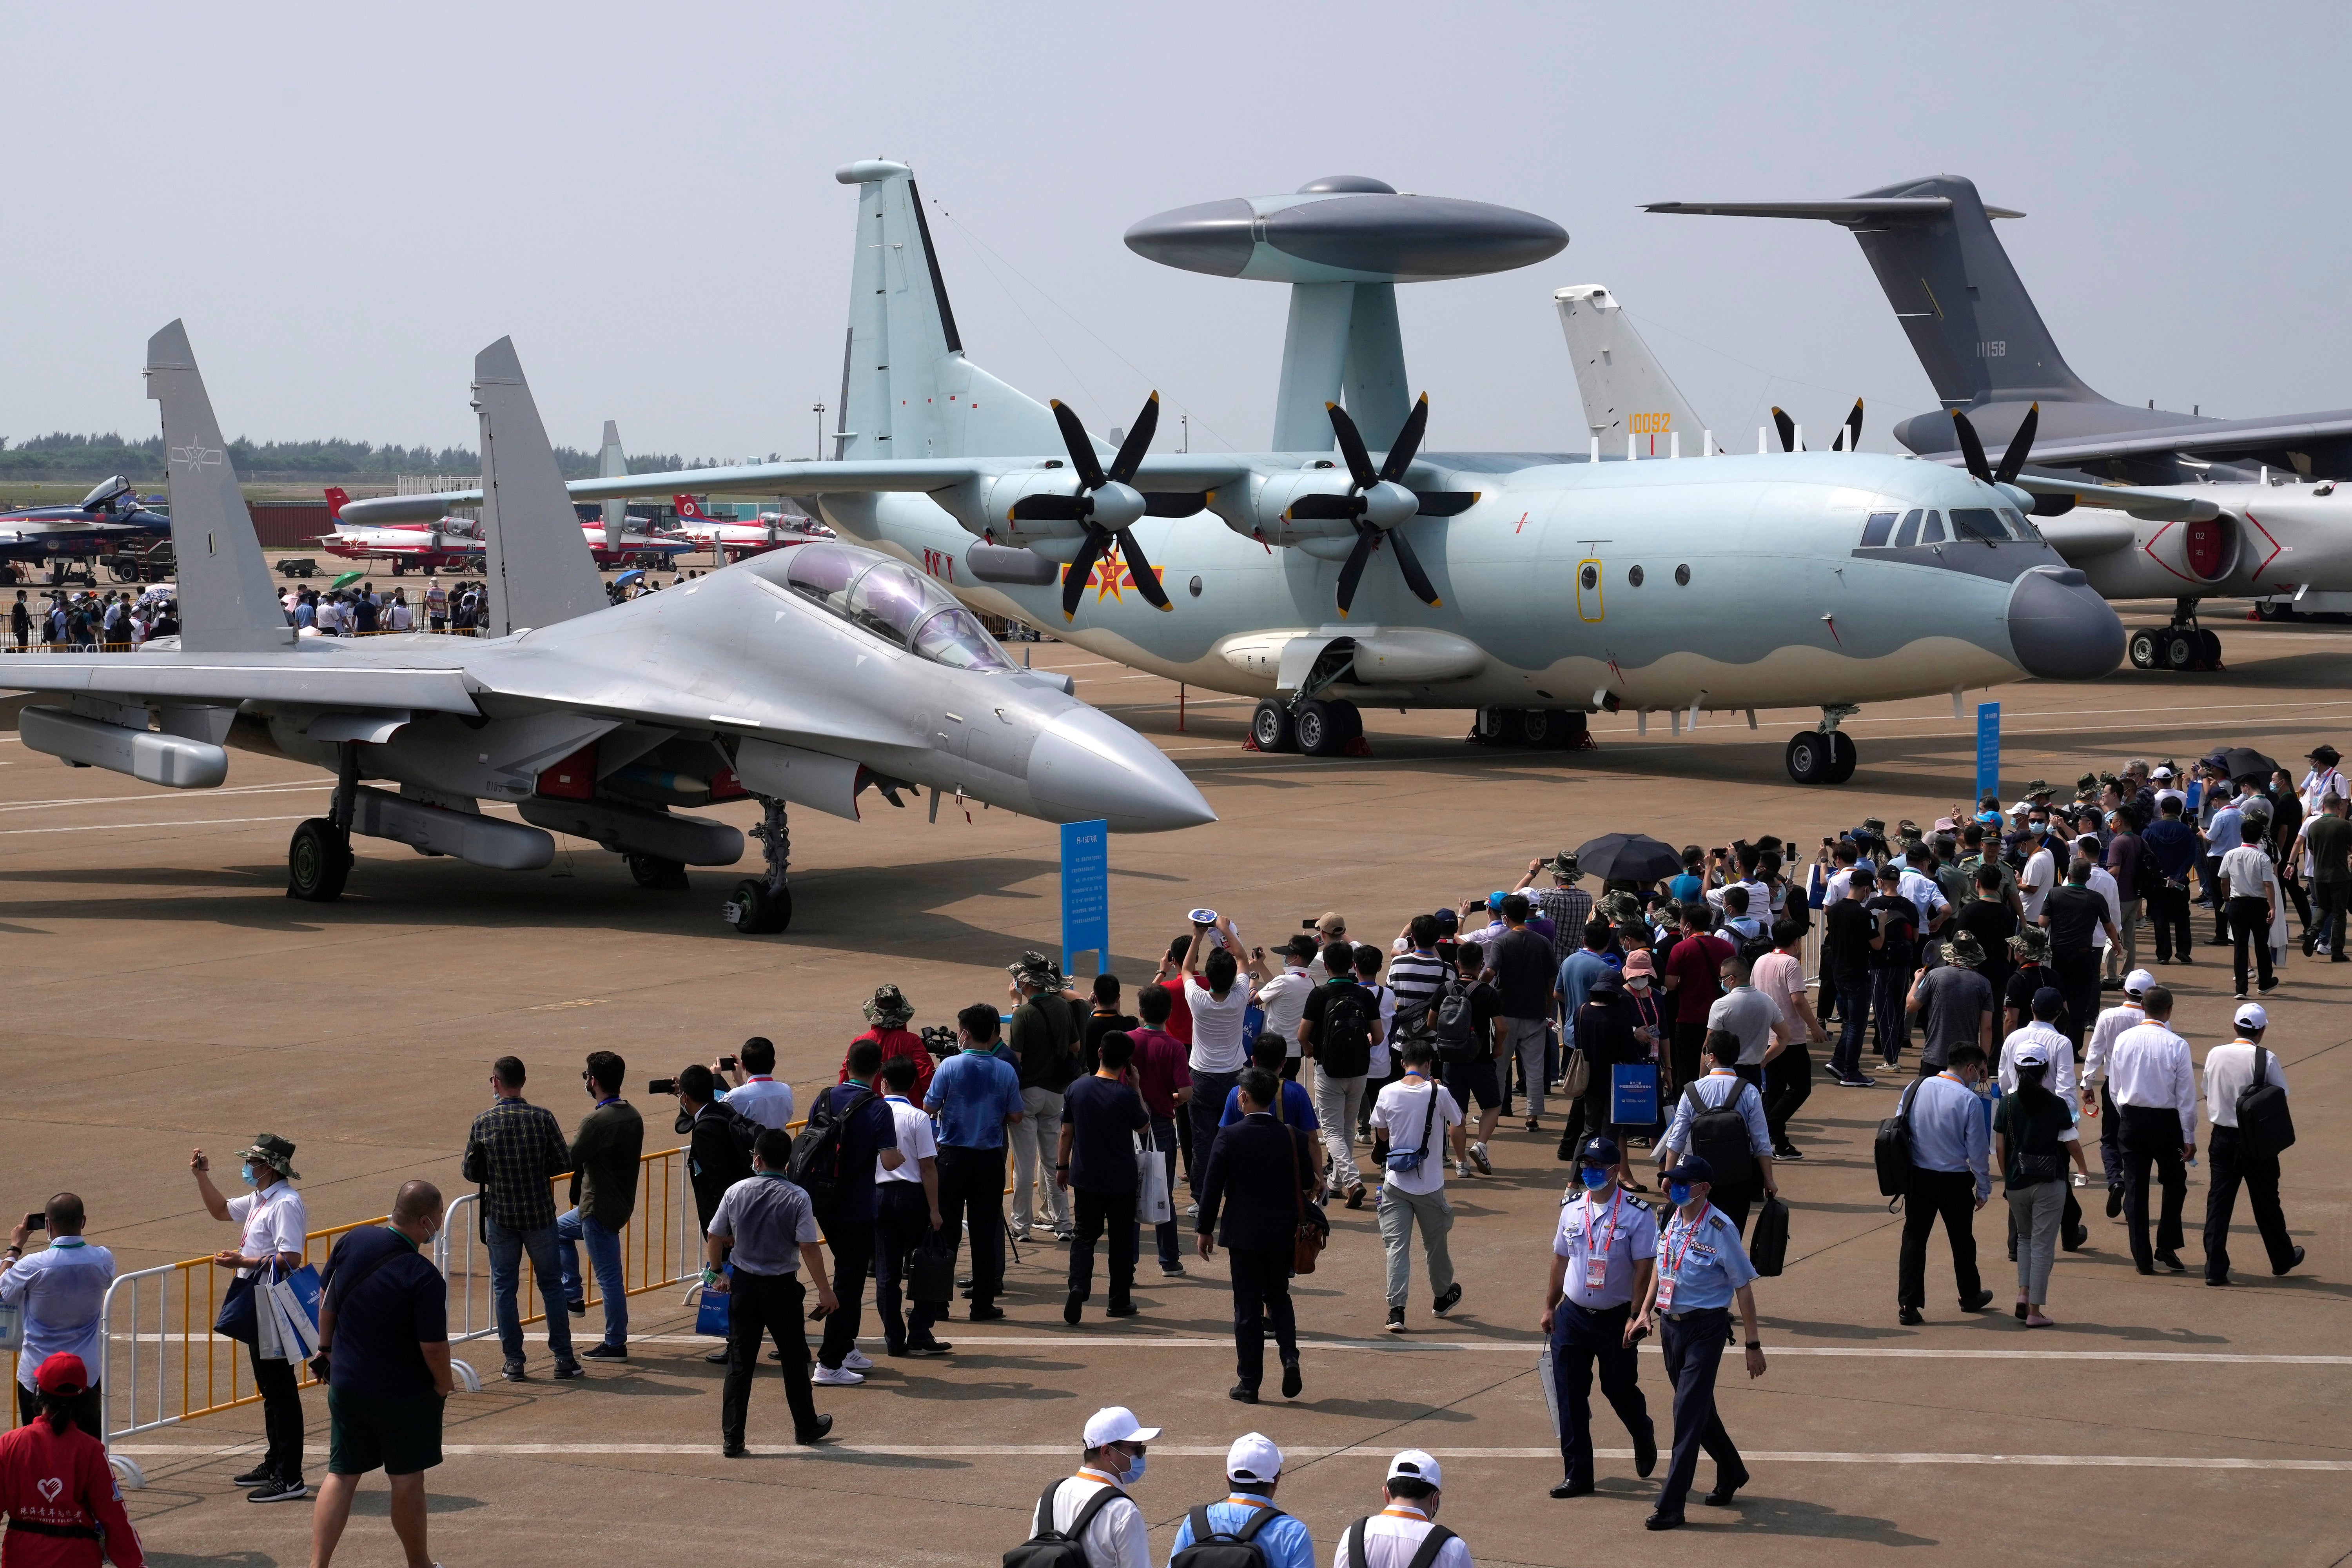 File photo. Visitors view the Chinese military's J-16D electronic warfare airplane, left, and the KJ-500 airborne early warning and control aircraft at right during 13th China International Aviation and Aerospace Exhibition on 29 September in Zhuhai in southern China's Guangdong province